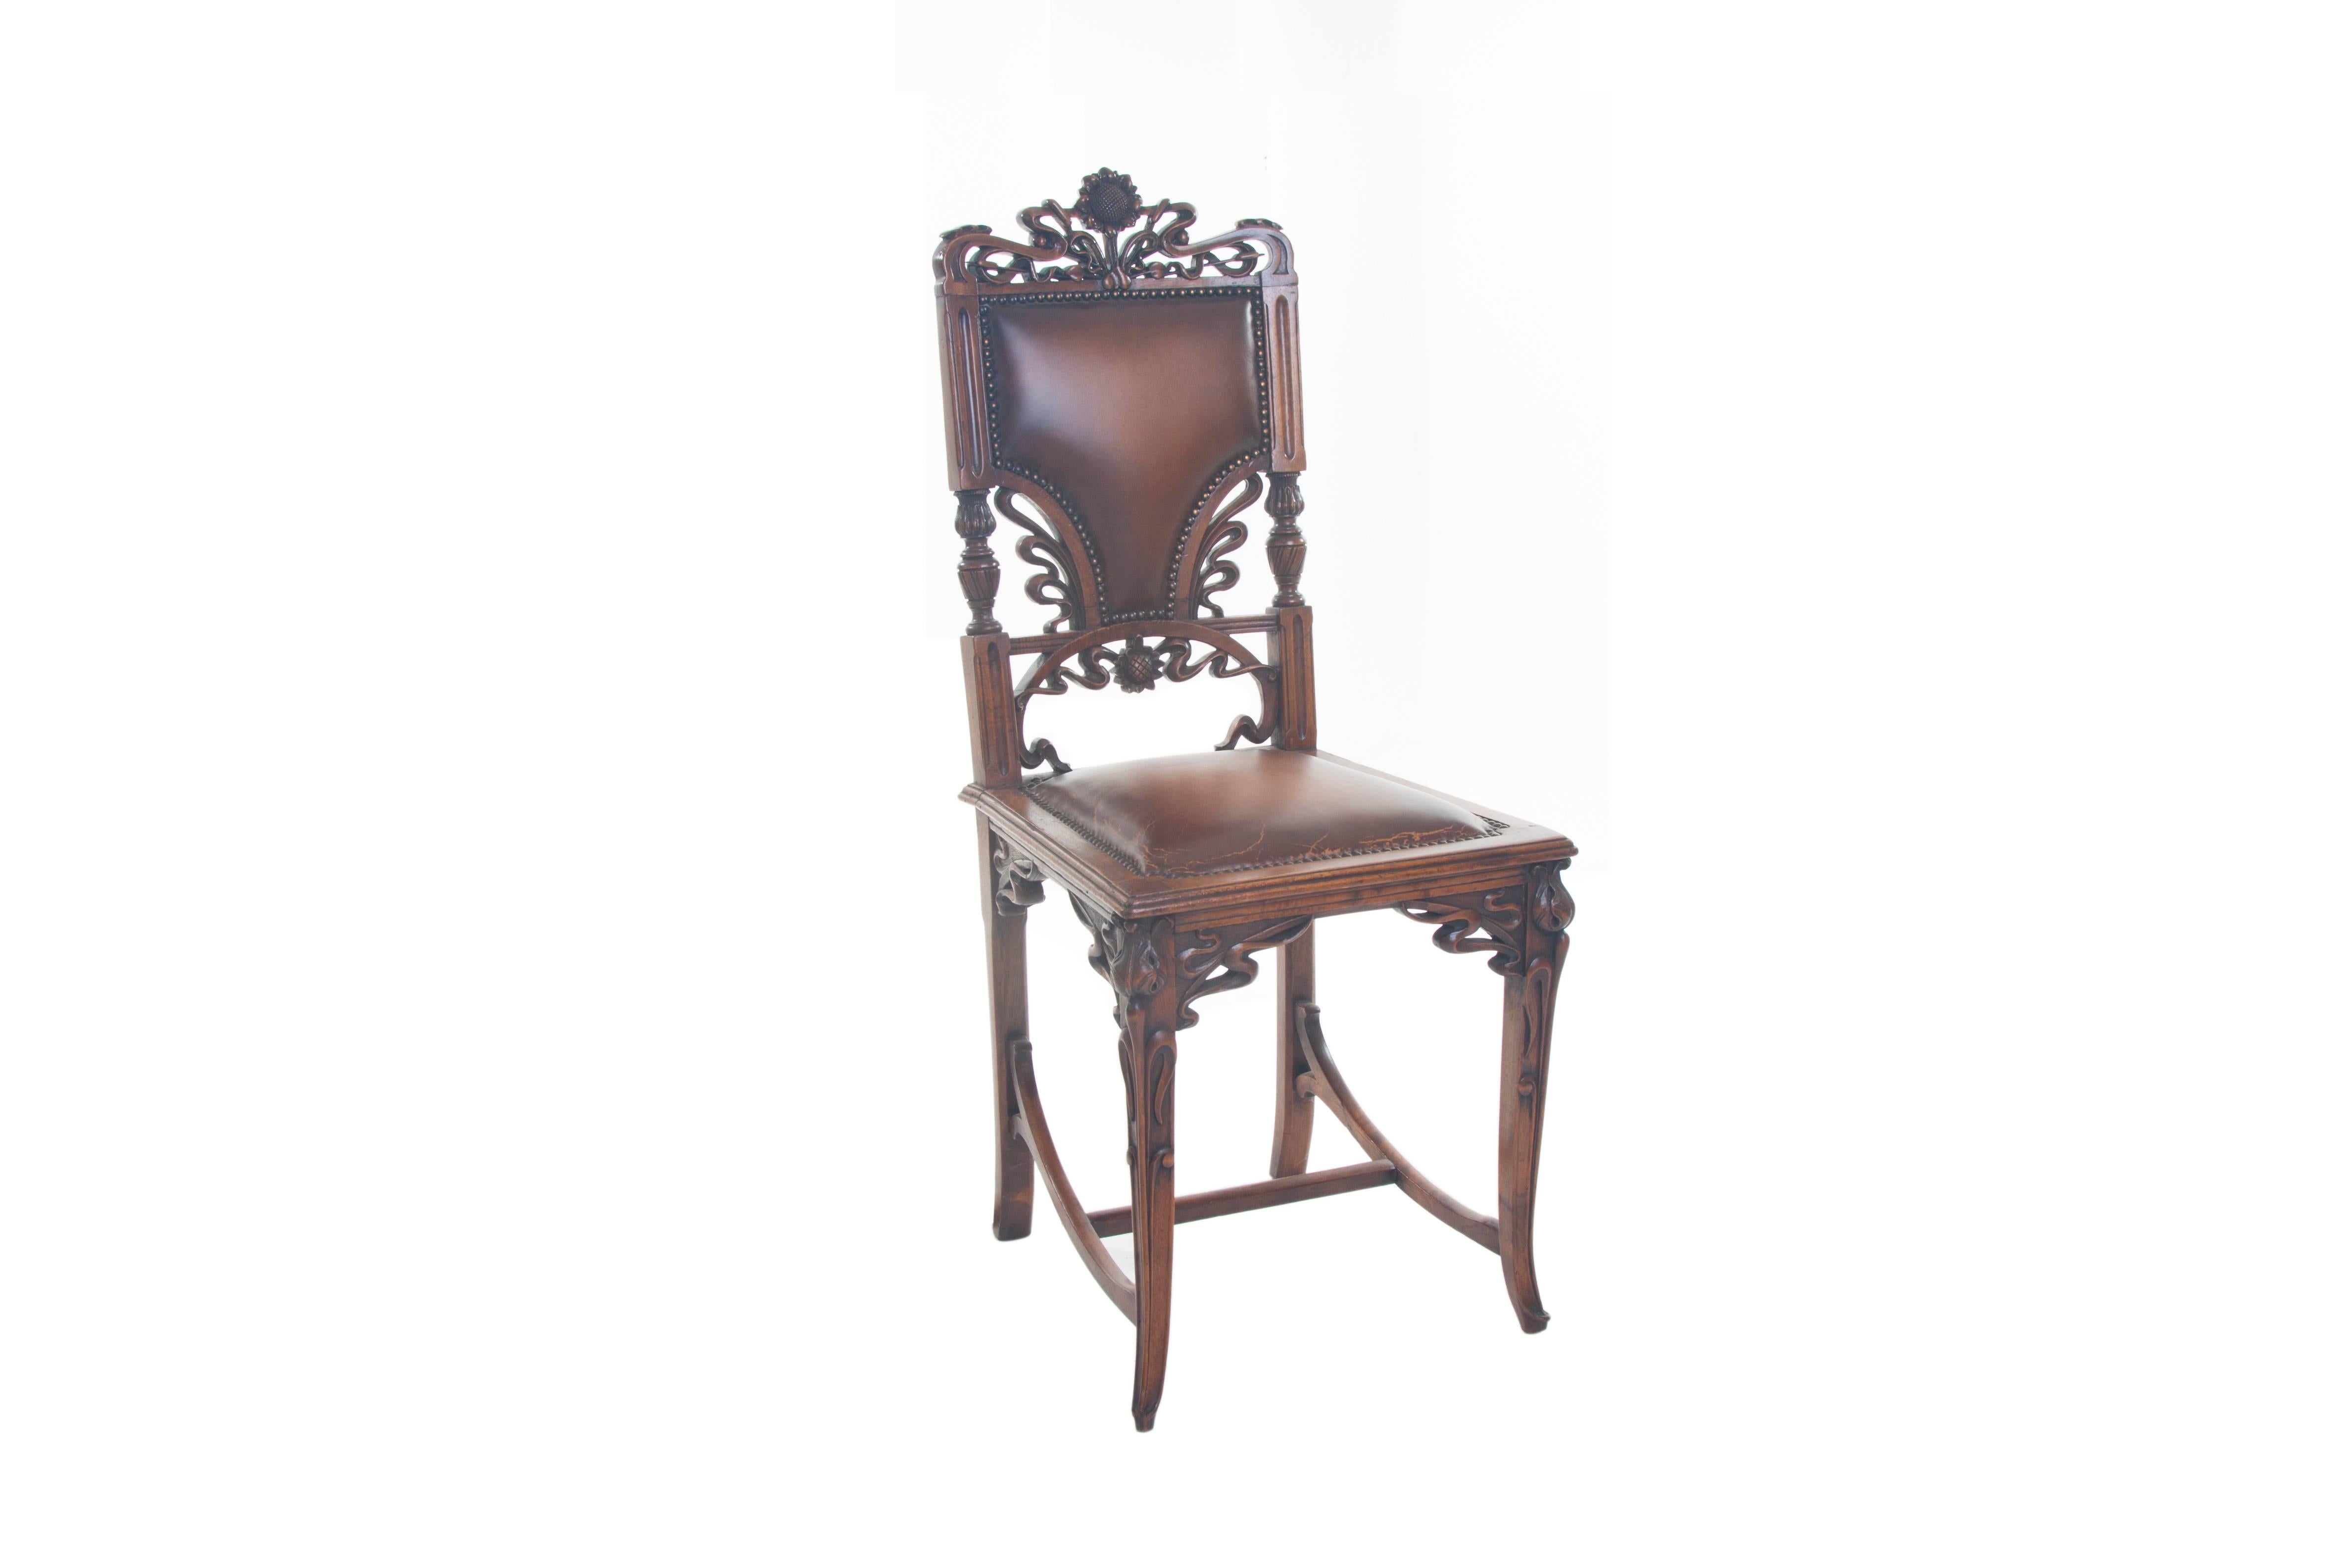 Magnificent "Liberty Chair", Italian, circa 1912. Organic floral motifs. Fully restored with new 'aged patina' leather upholstery.